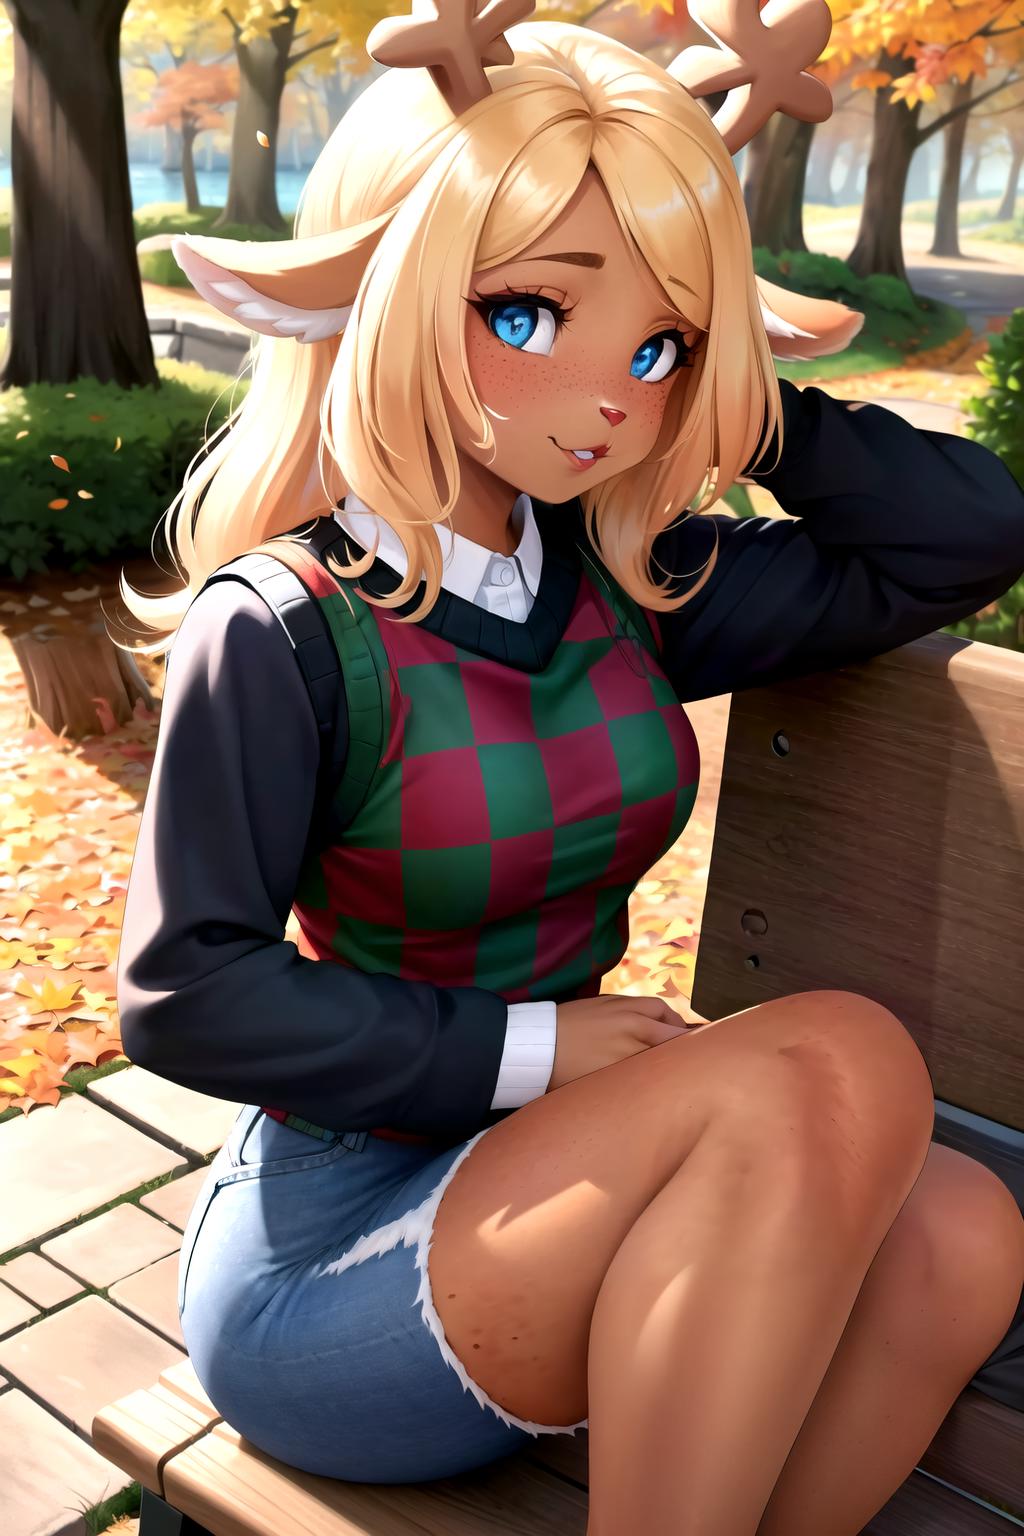 AI model image by wartificialai765